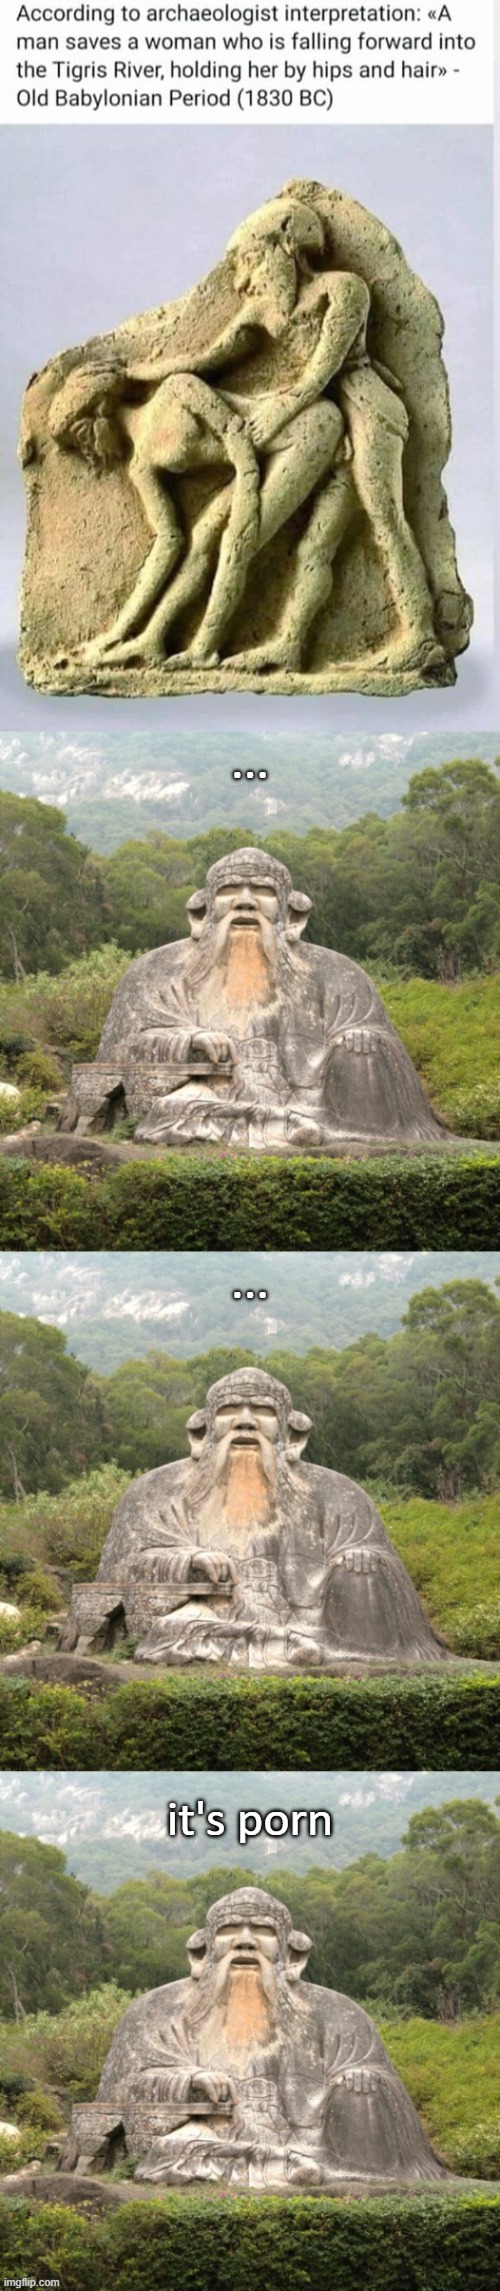 Laozi statue 3-panel getting rock hard again... for archaeology! | ... ... it's porn | image tagged in laozi statue 3-panel,sex jokes,porn,history,lol,tablet | made w/ Imgflip meme maker